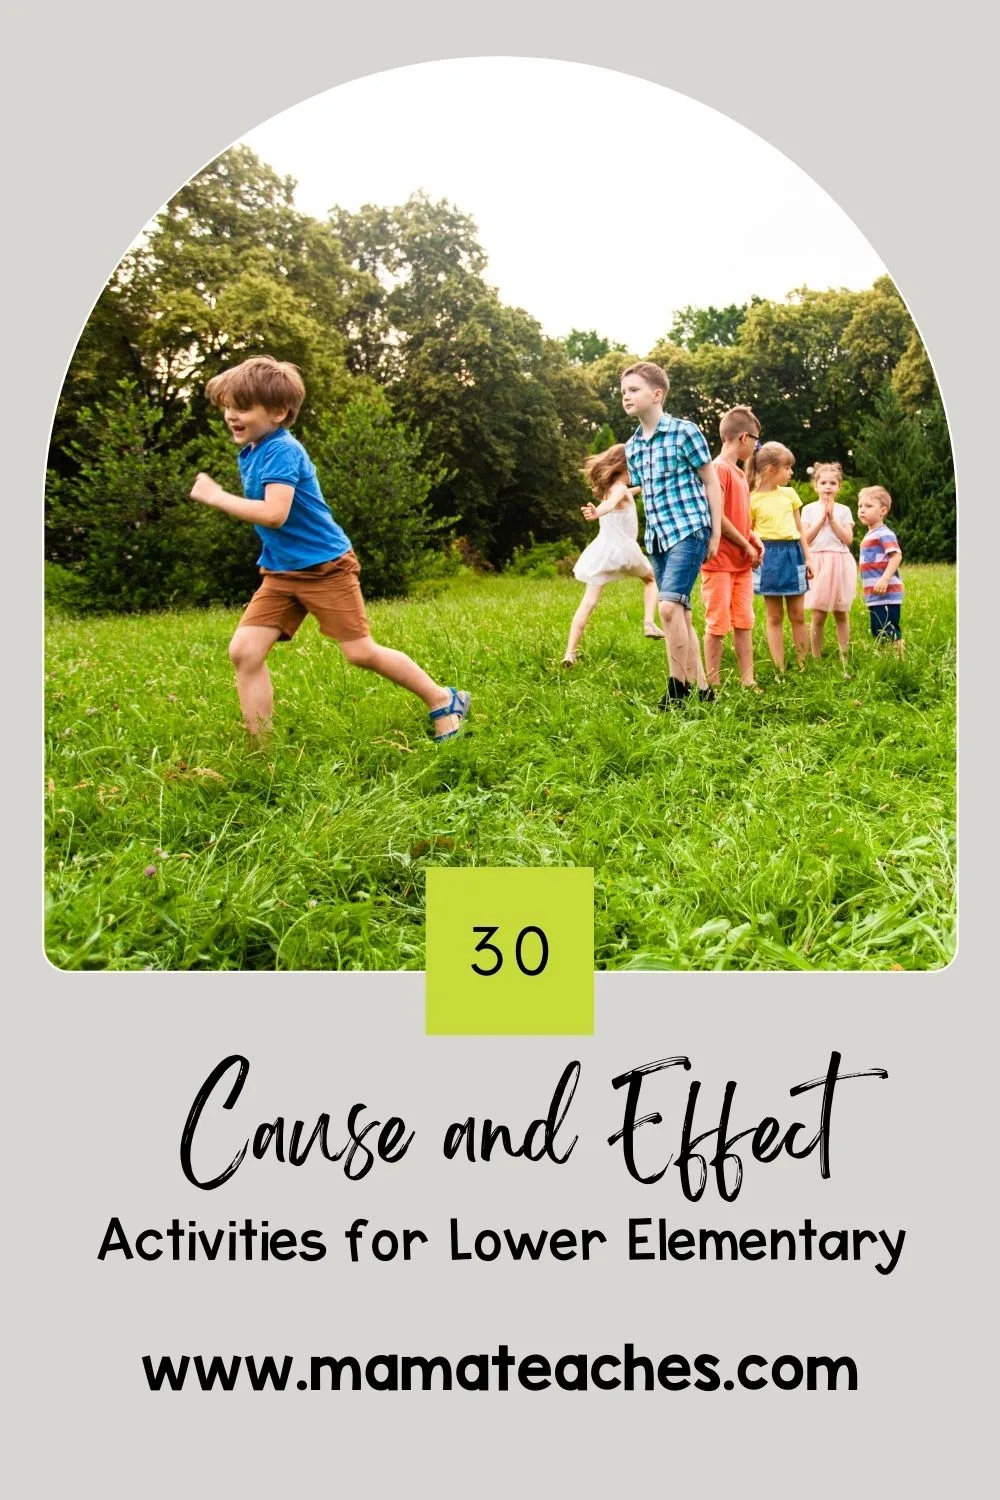 30 Cause and Effect Activities for Lower Elementary